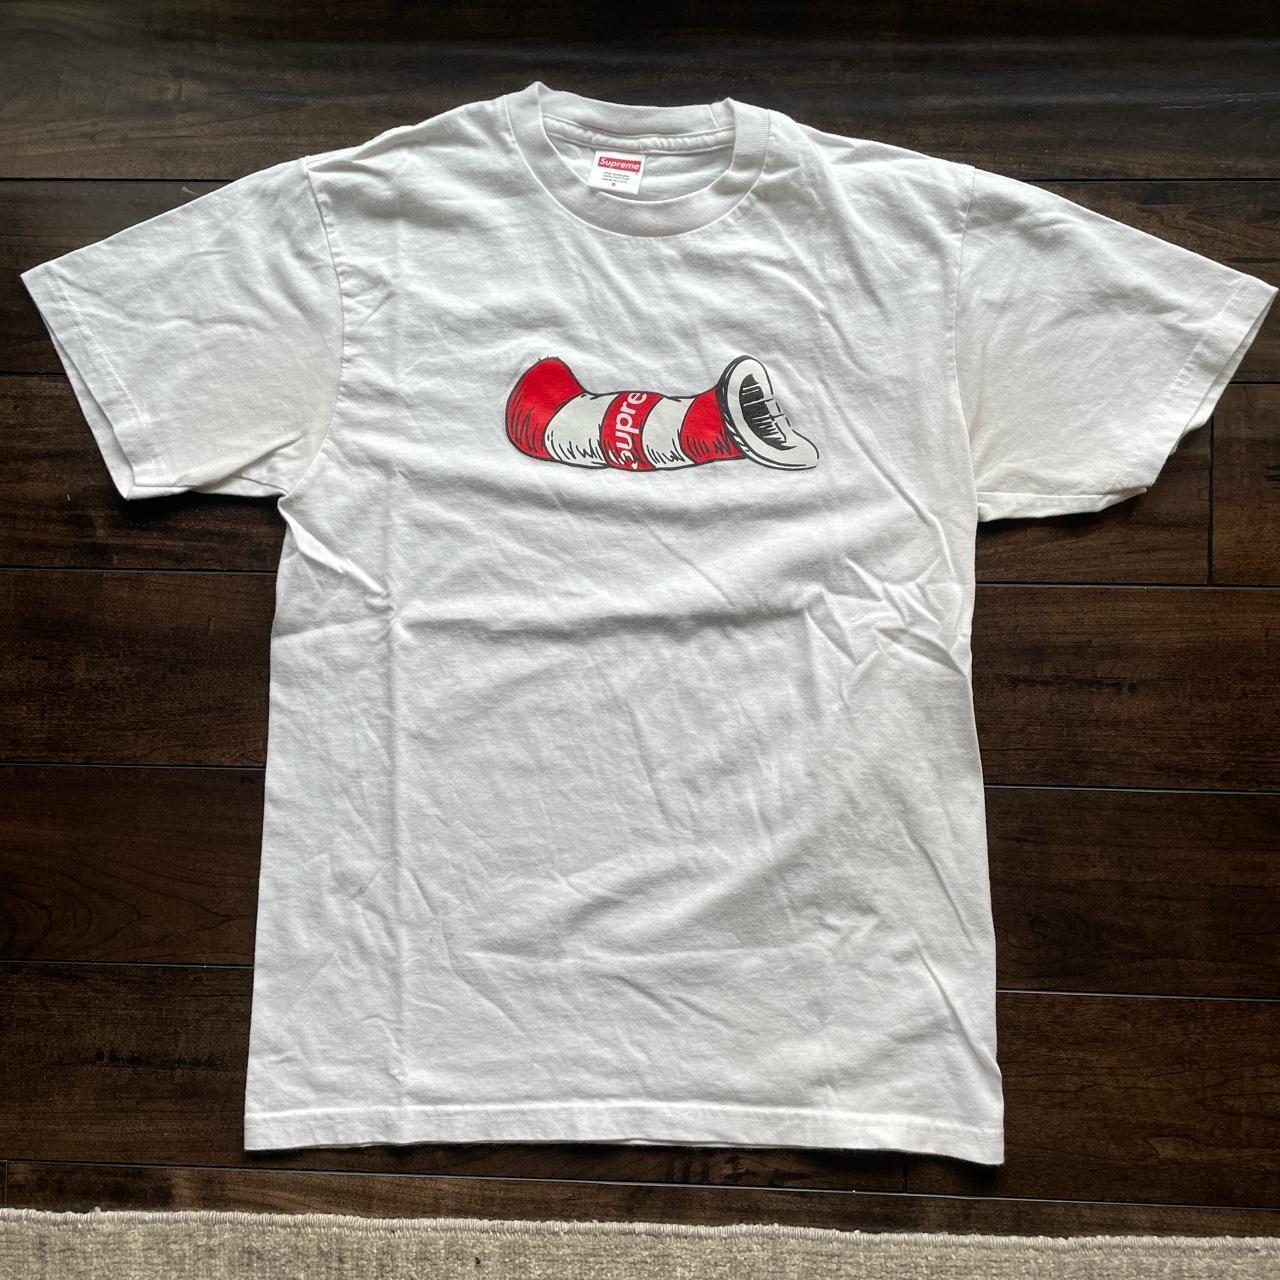 Supreme Cat in The Hat Tee (White), - Worn <5 times...